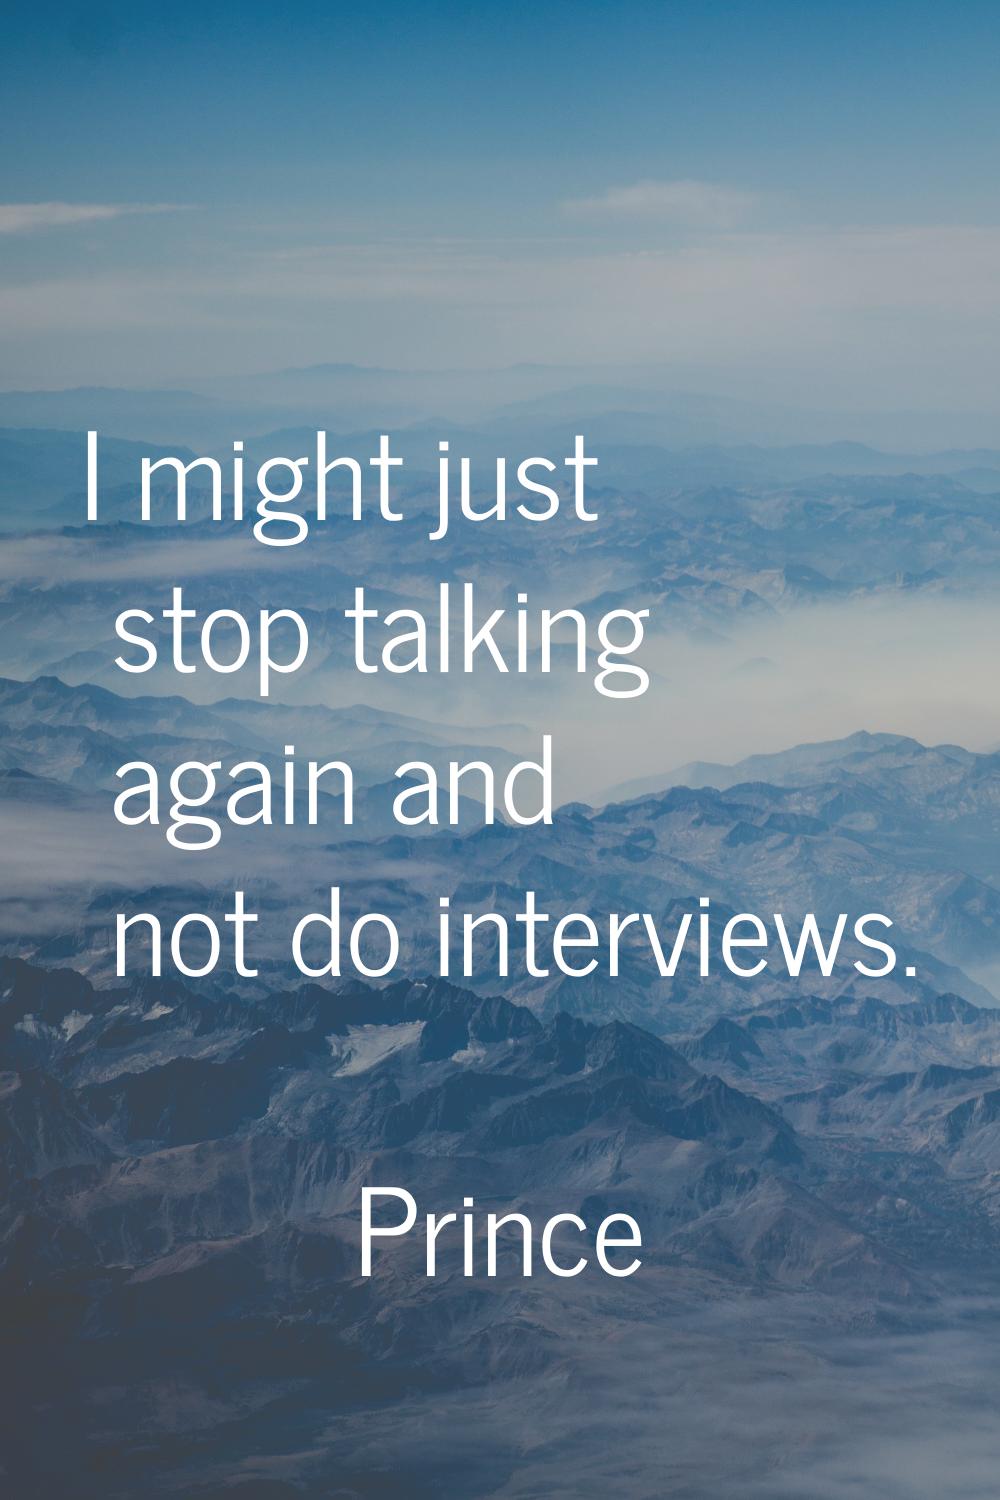 I might just stop talking again and not do interviews.